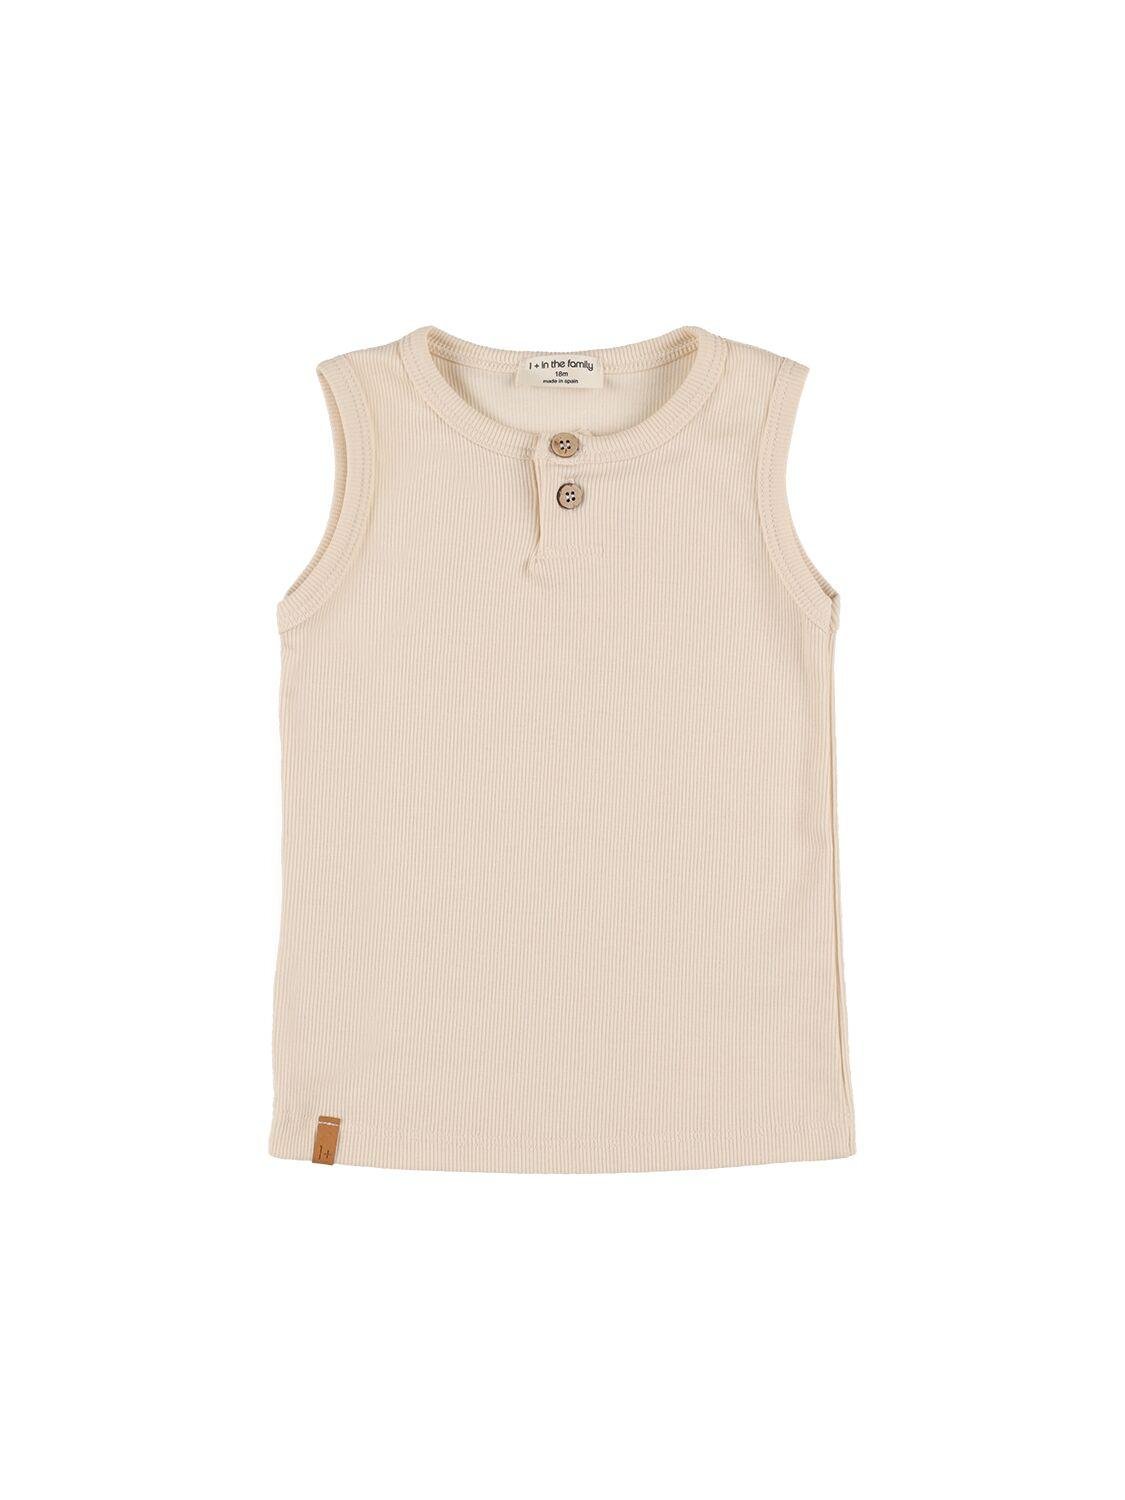 Cotton Jersey Tank Top by 1 + IN THE FAMILY